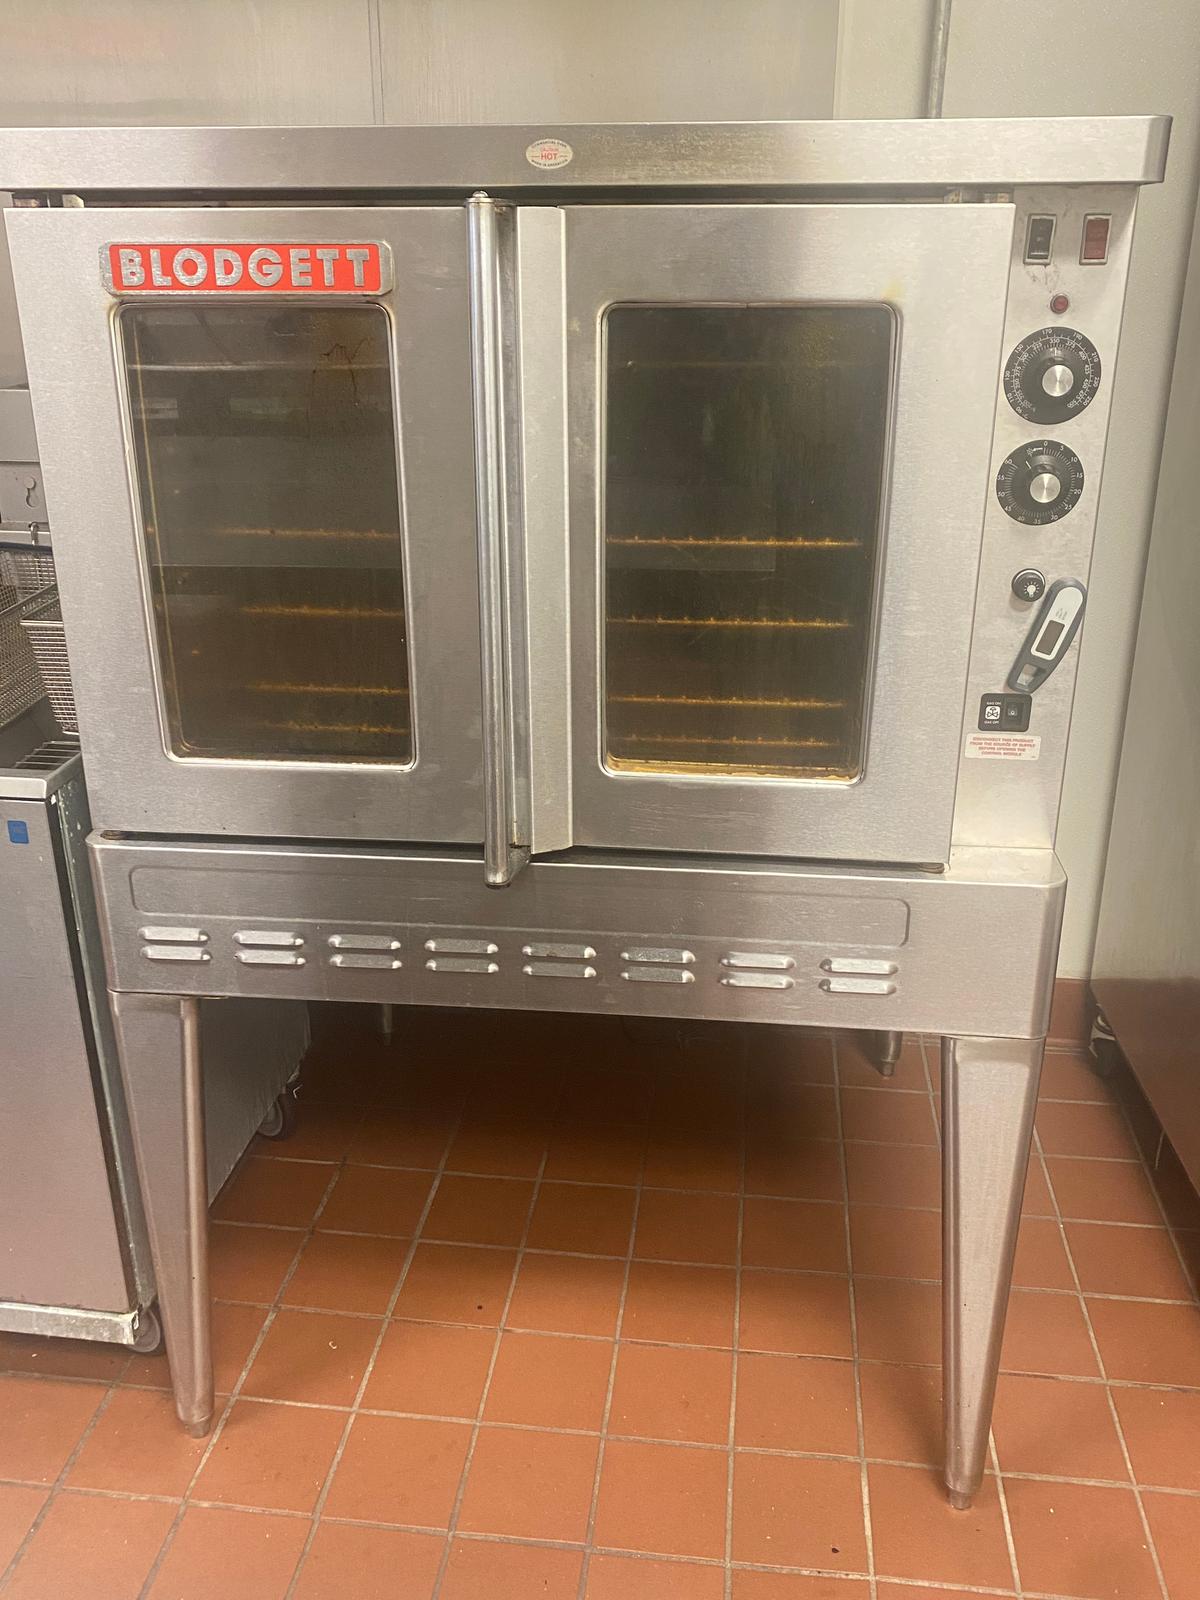 Blodgett Stand Up Gas Convection Oven Model Sho -200-G